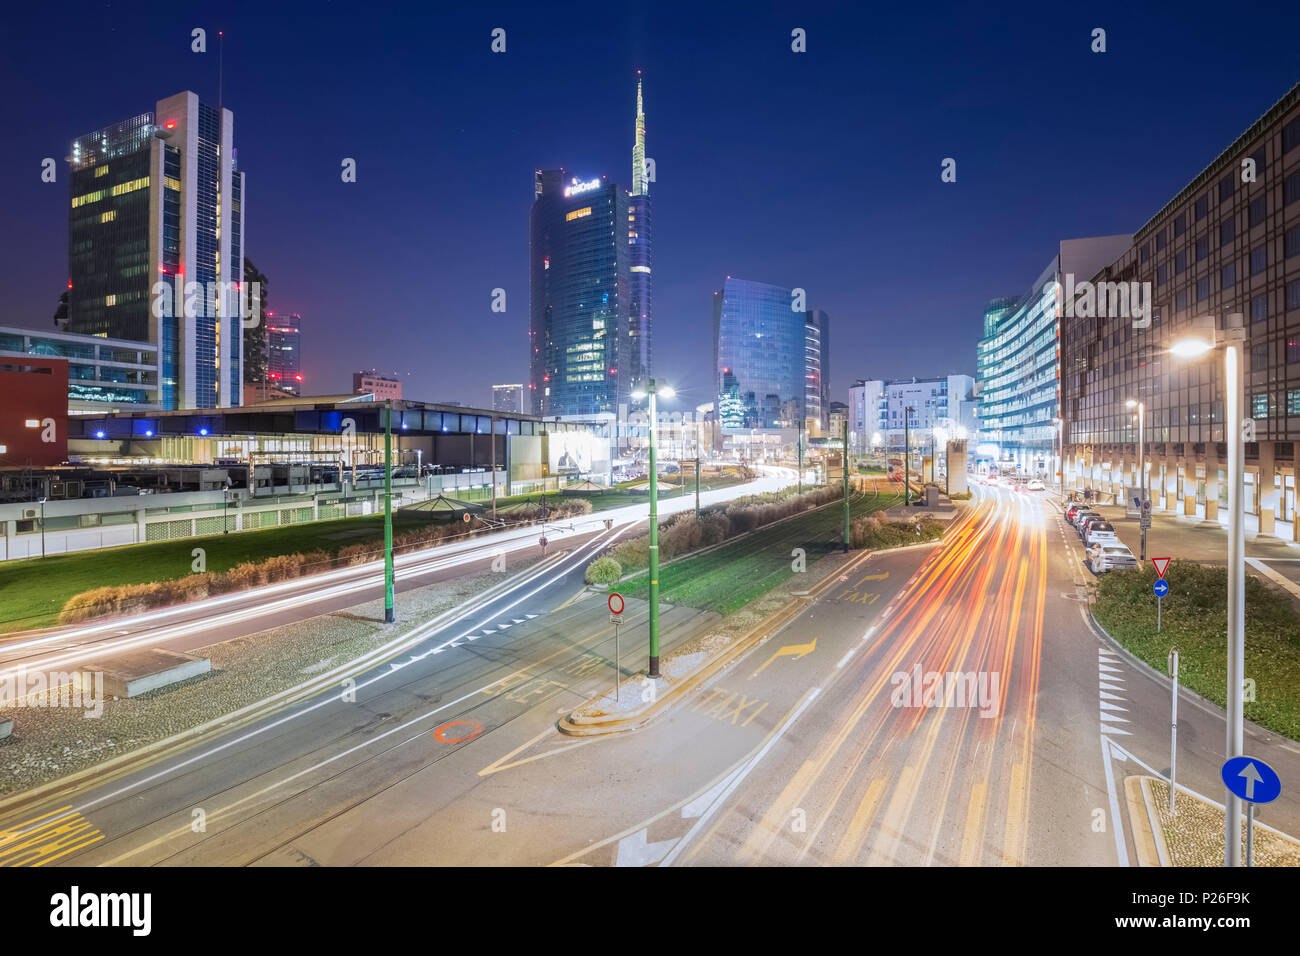 View of the Unicredit Tower and cars trails from the avenue Luigi Sturzo during the evening. Milan, Lombardy, Italy. Stock Photo